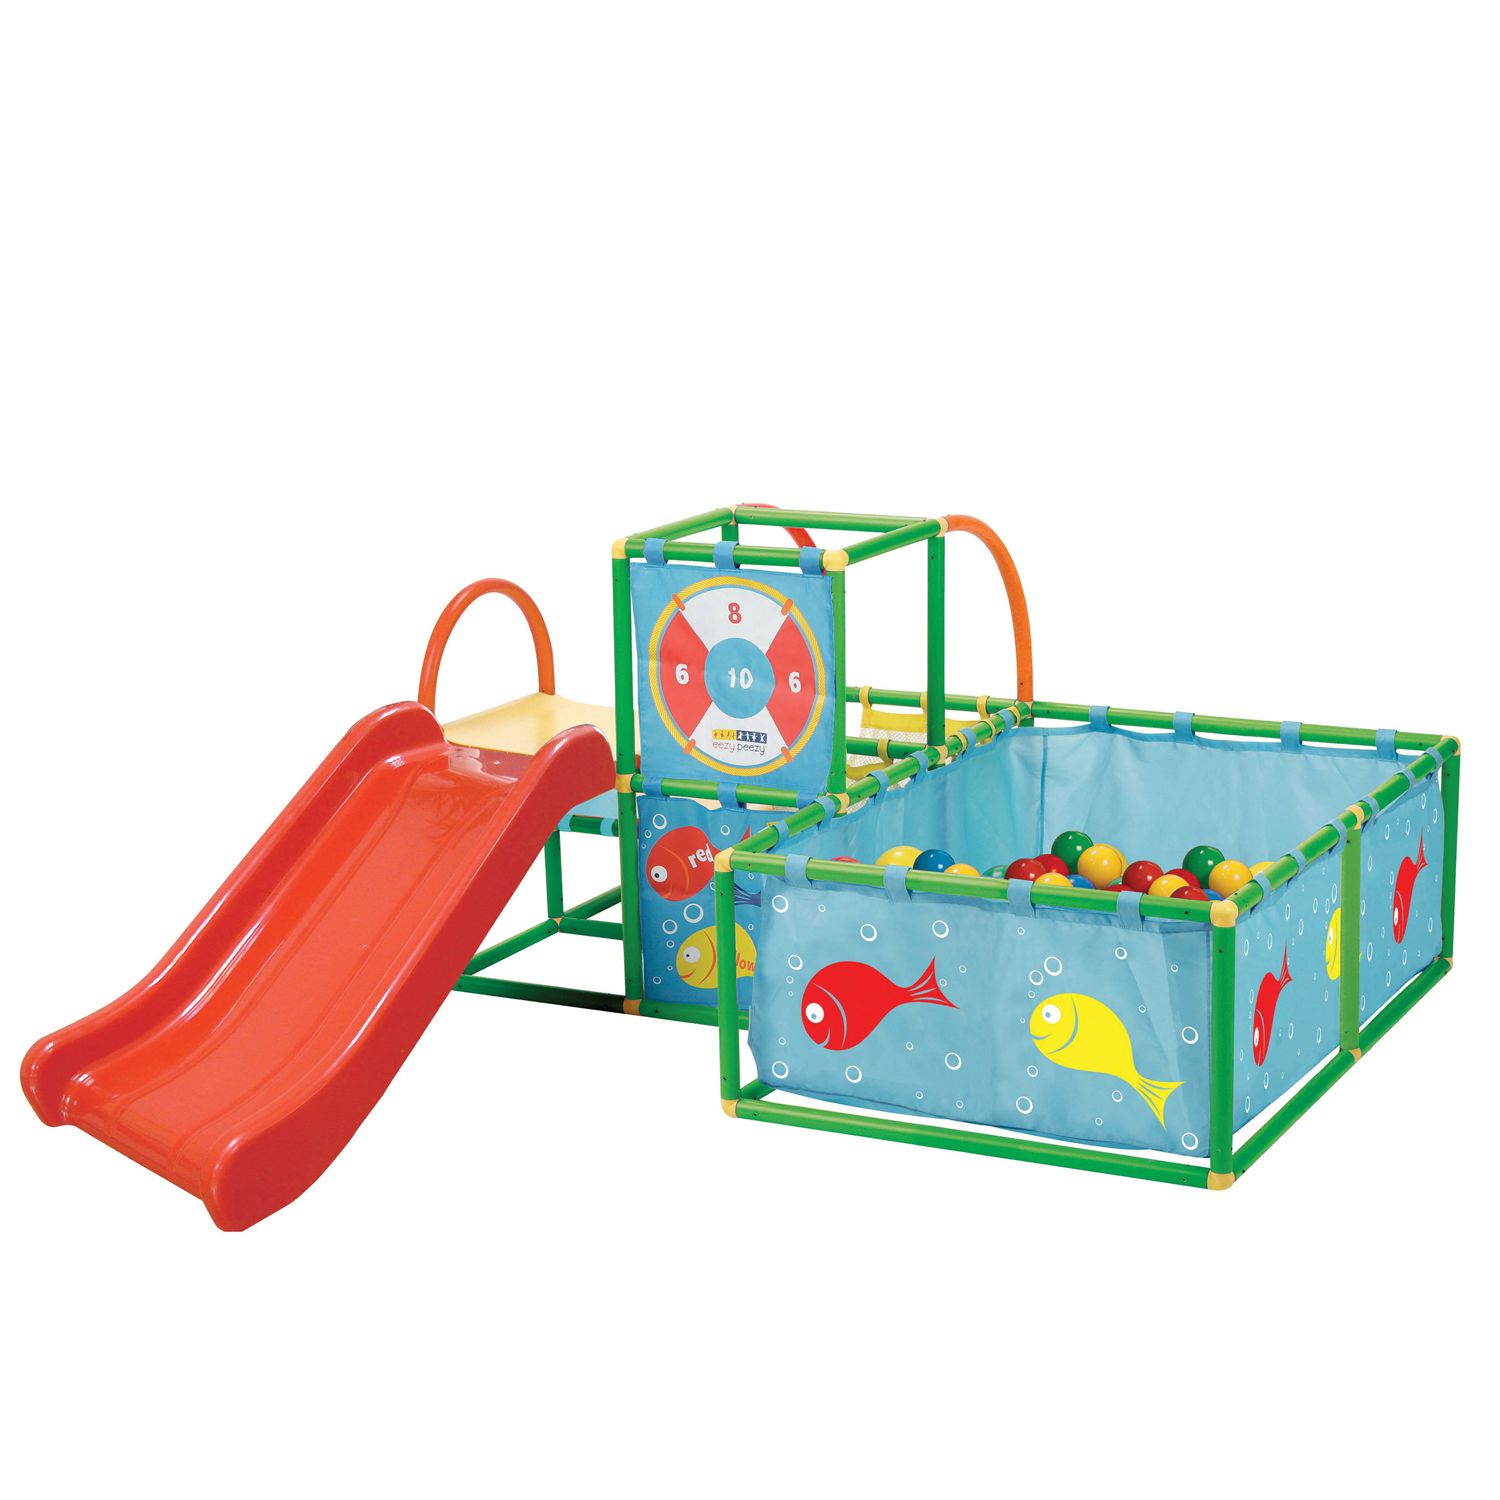 active play toys